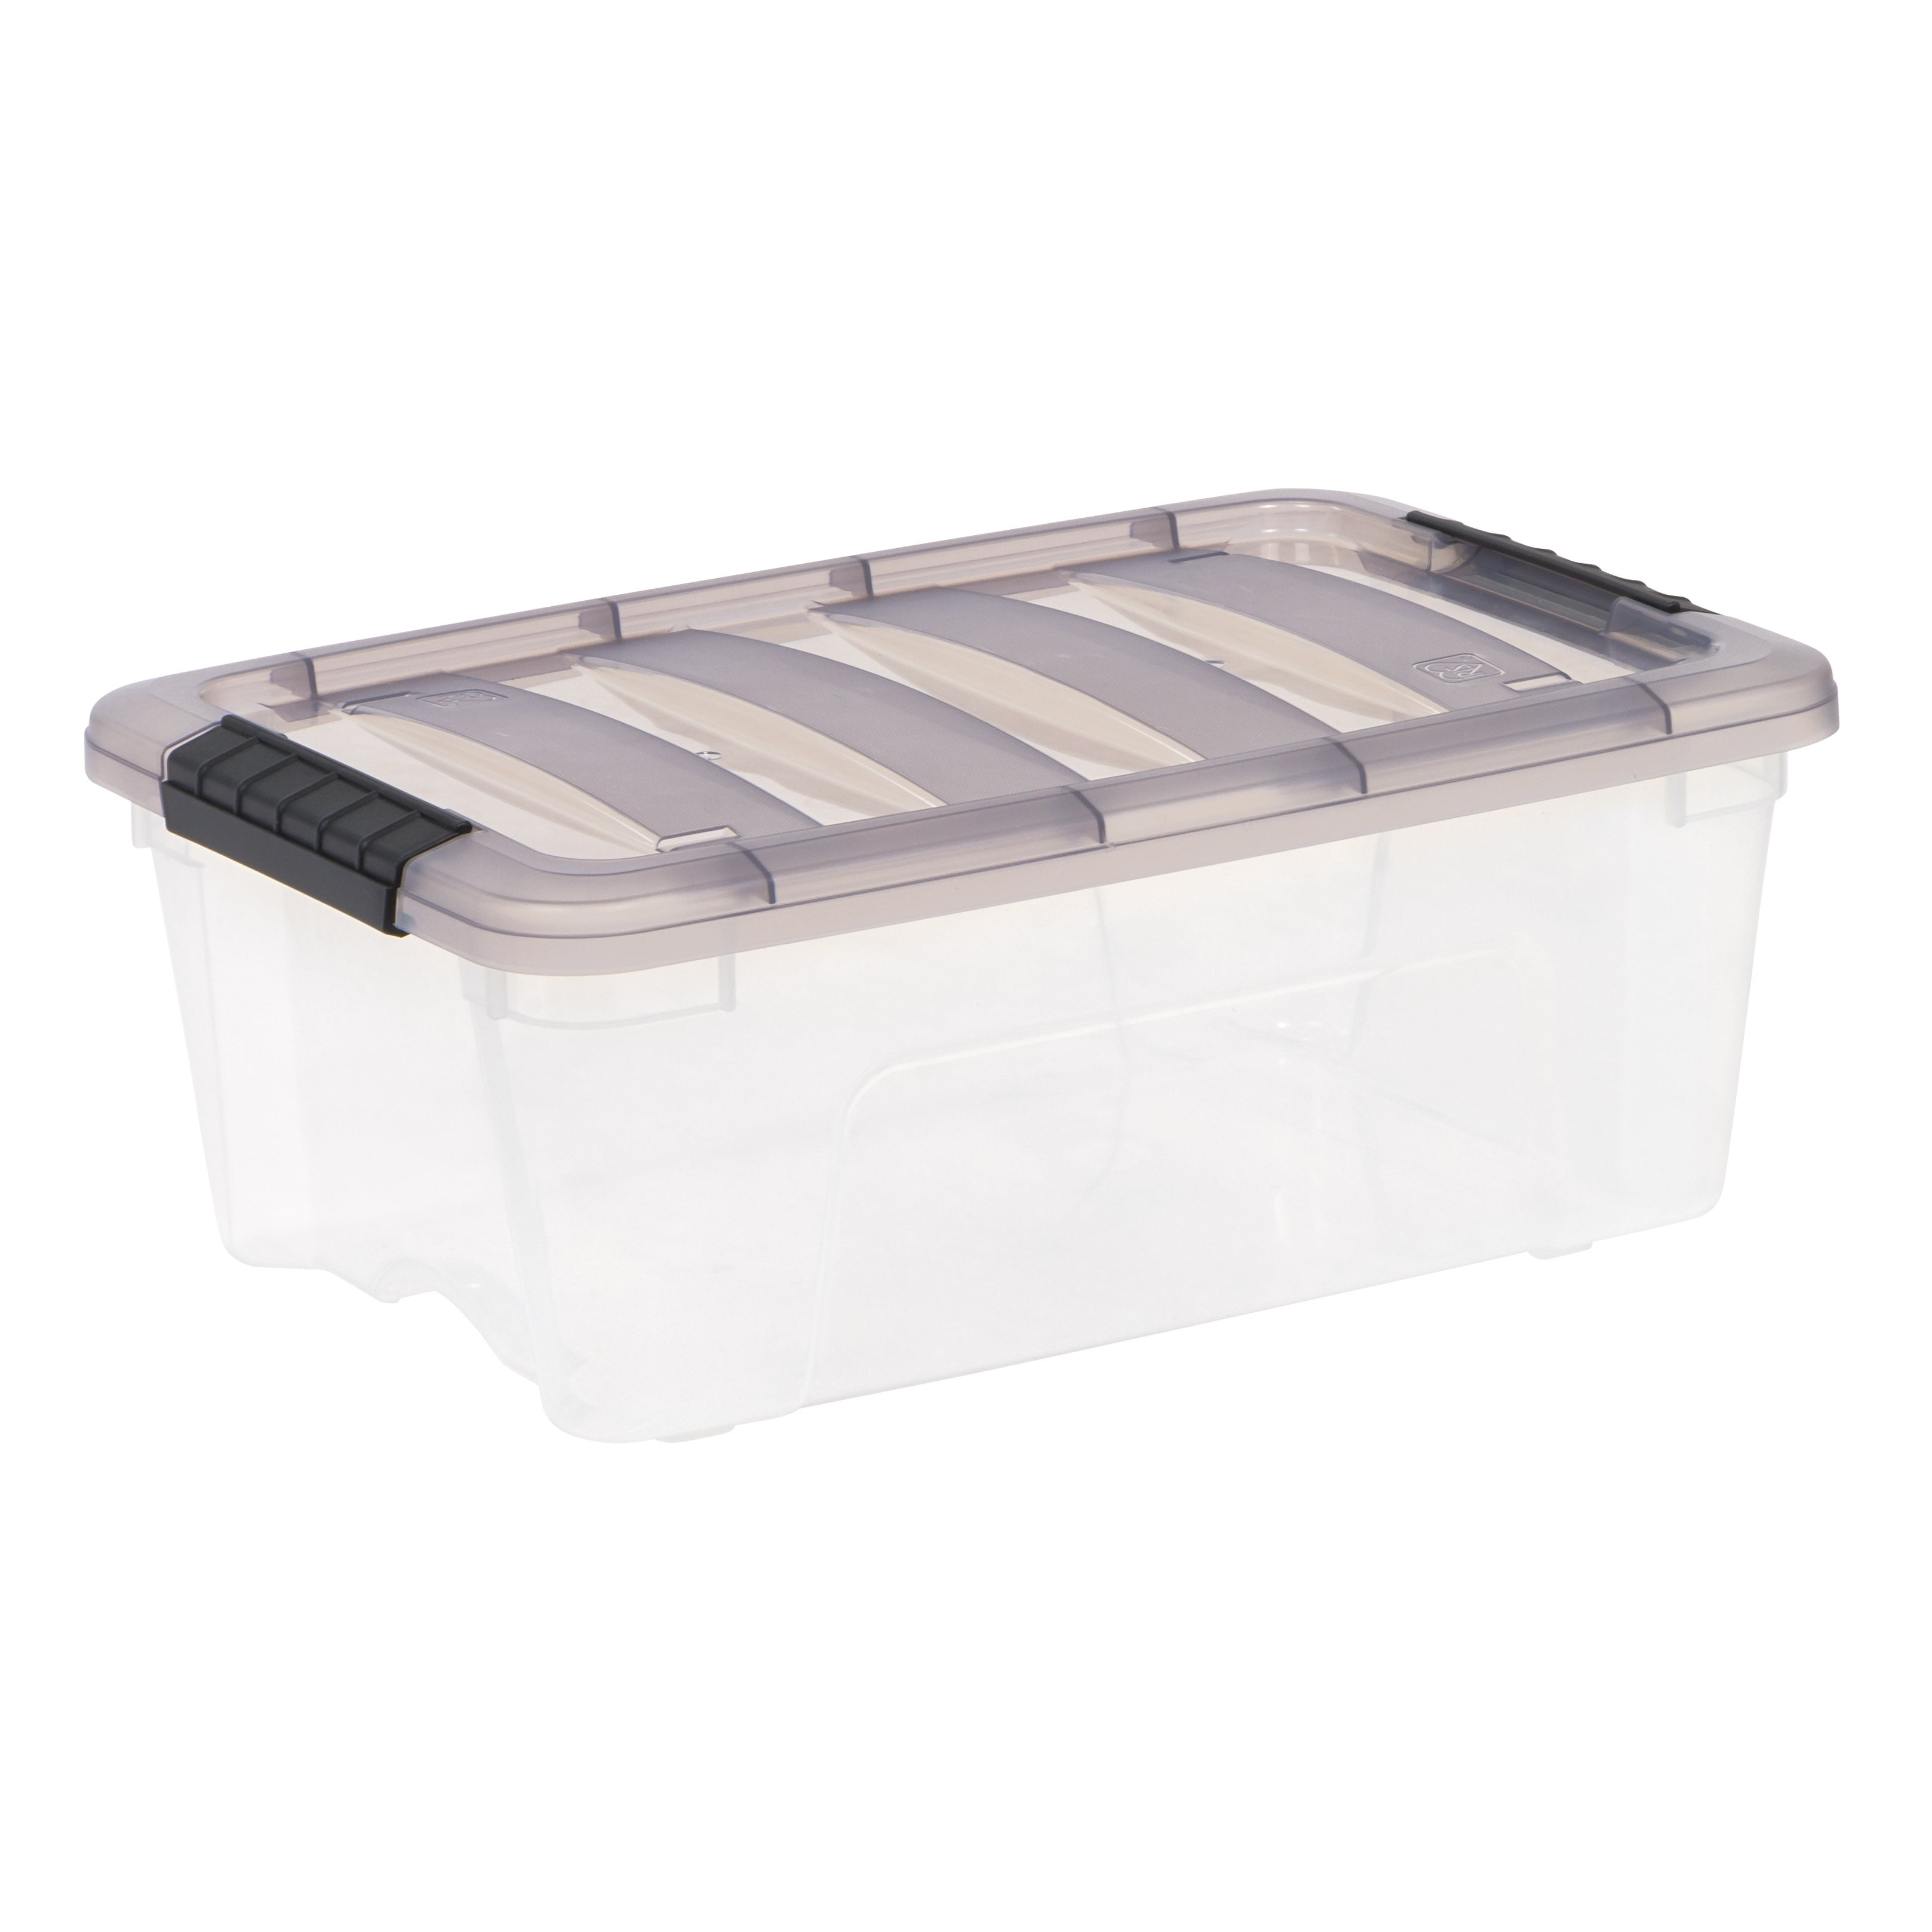 Transparent Paper Tape Storage Box with Removable Baffle - 36 Grid –  CHL-STORE